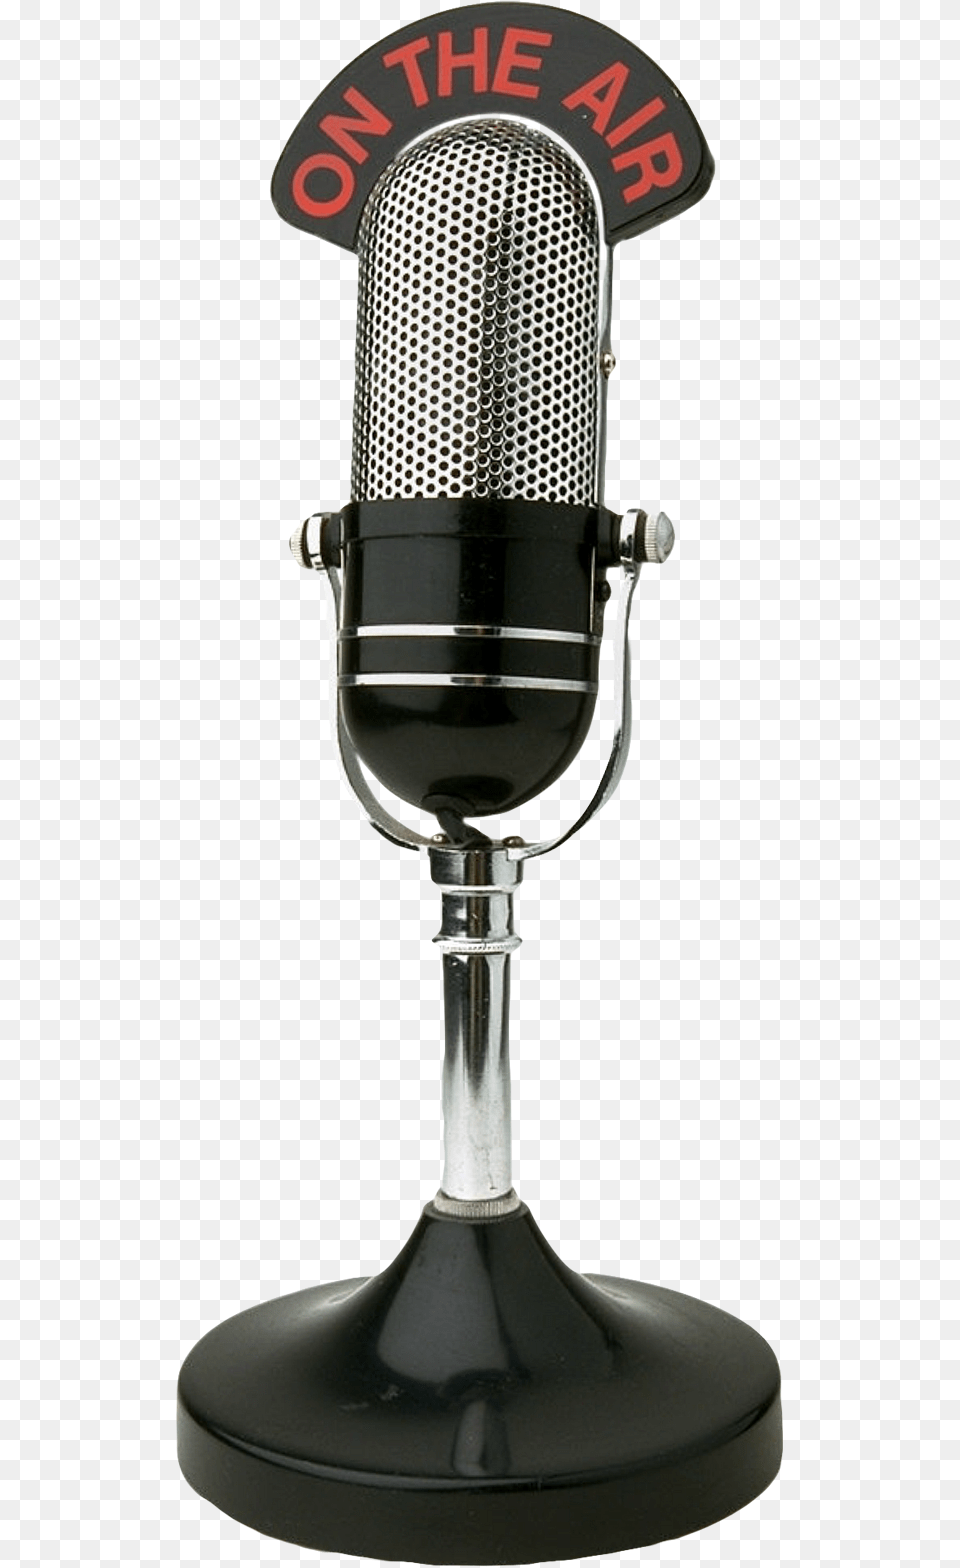 Microphone Purepng Transparent Cc0 Radio Microphone, Electrical Device Png Image